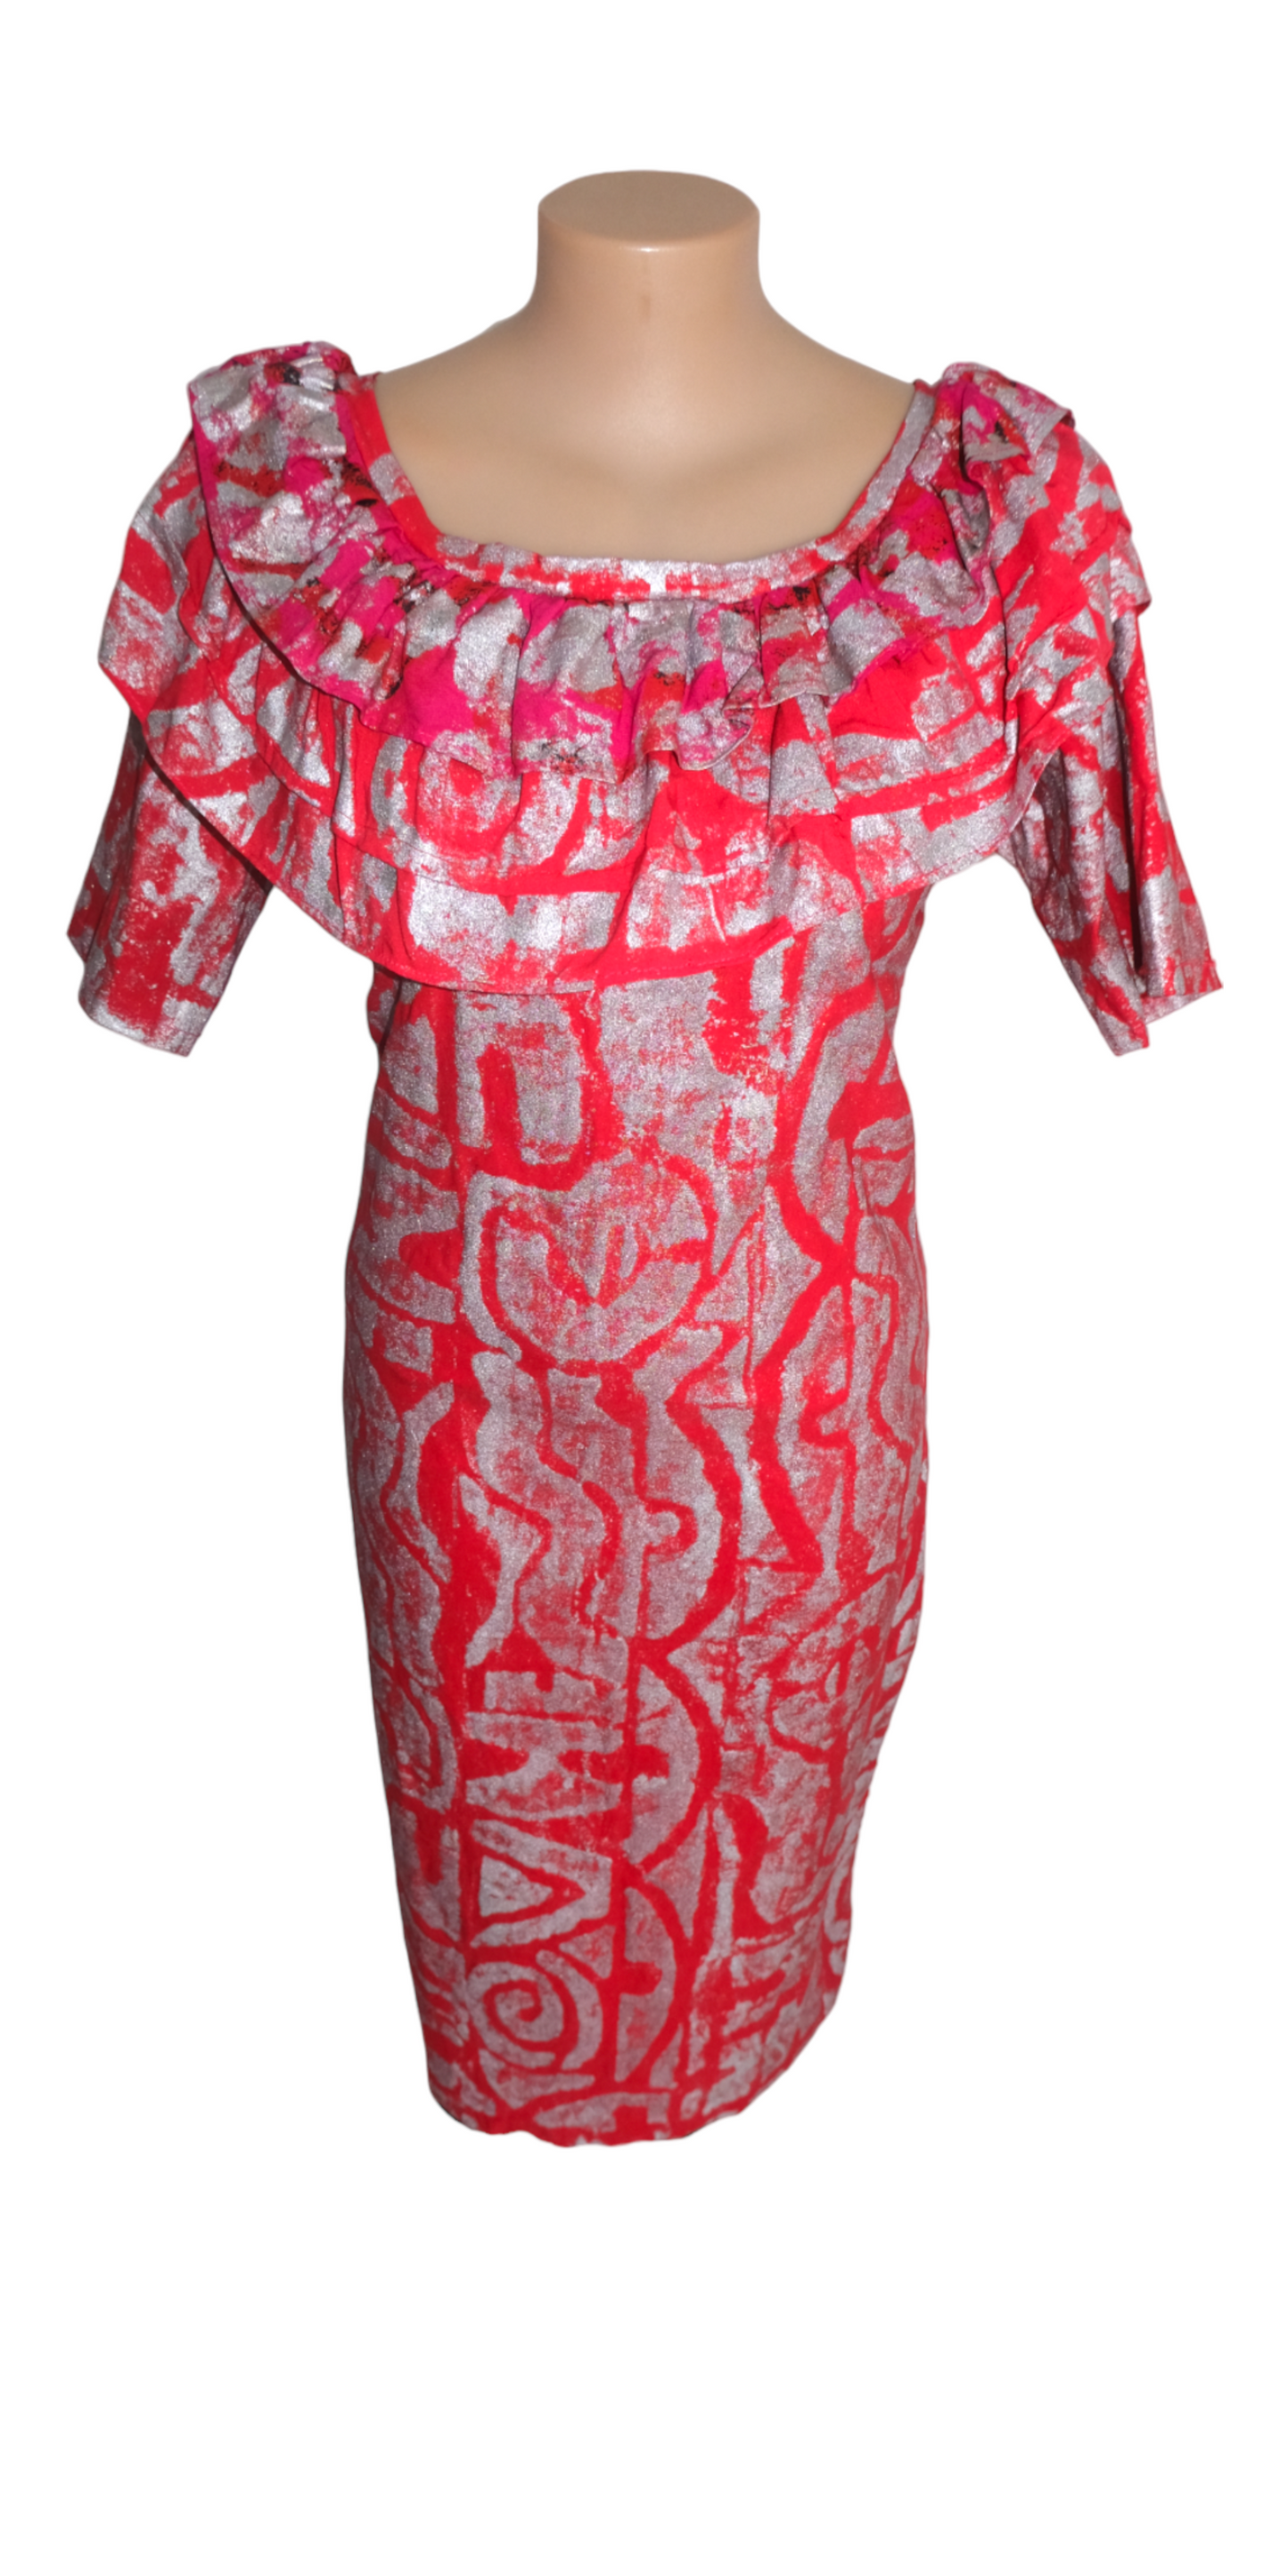 Aulelei Darling Dress Red Silver - 16